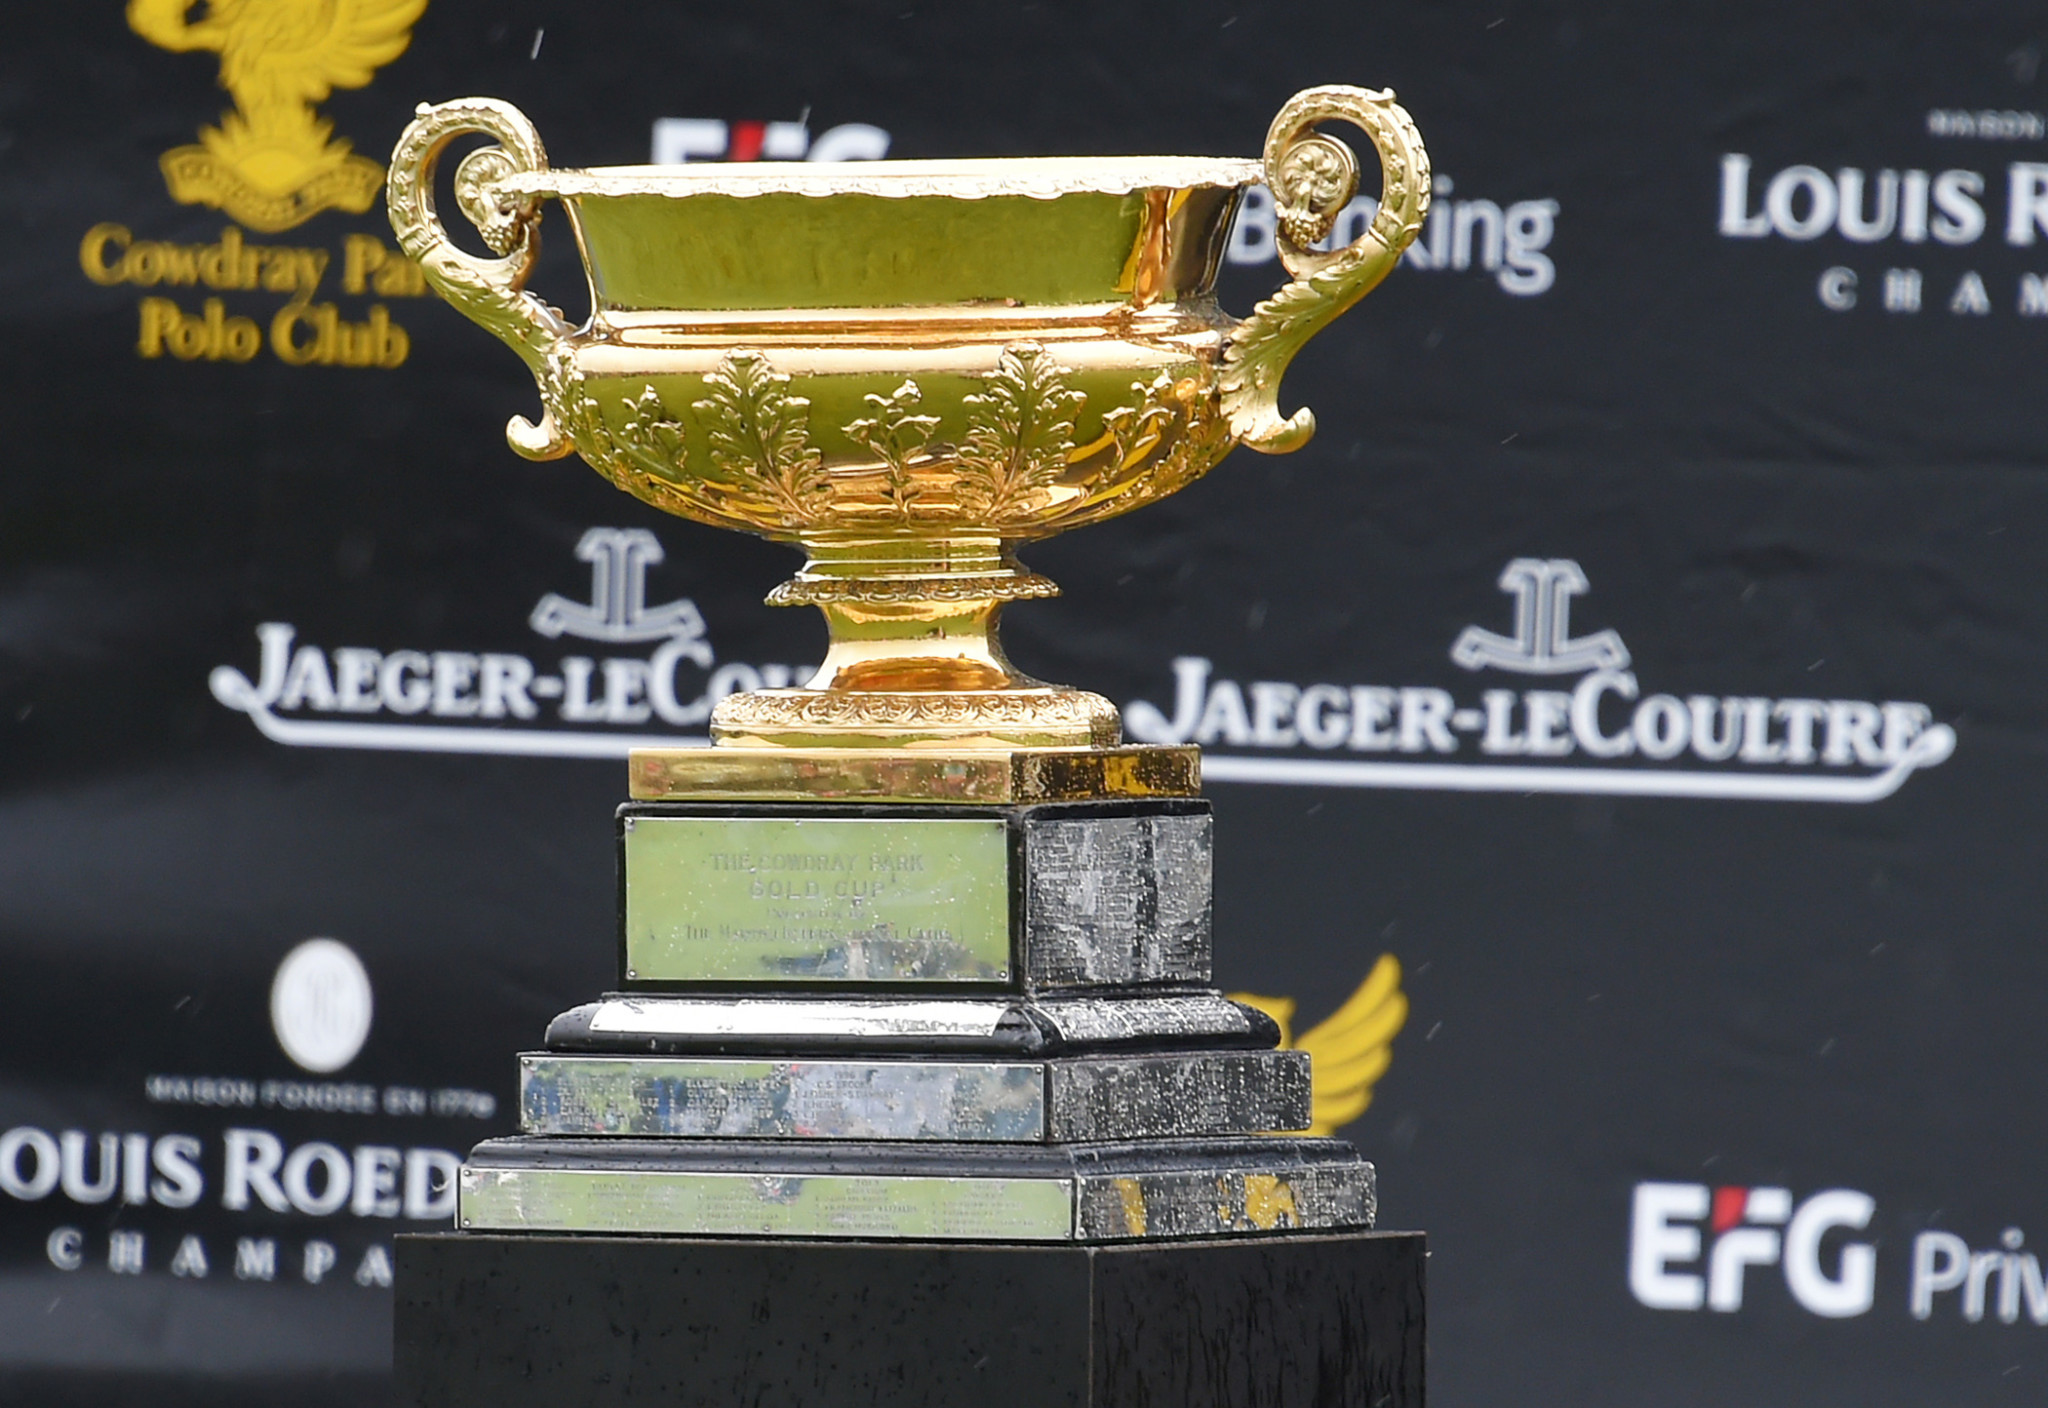 Dmb jaeger lecoultre gold cup polo final092